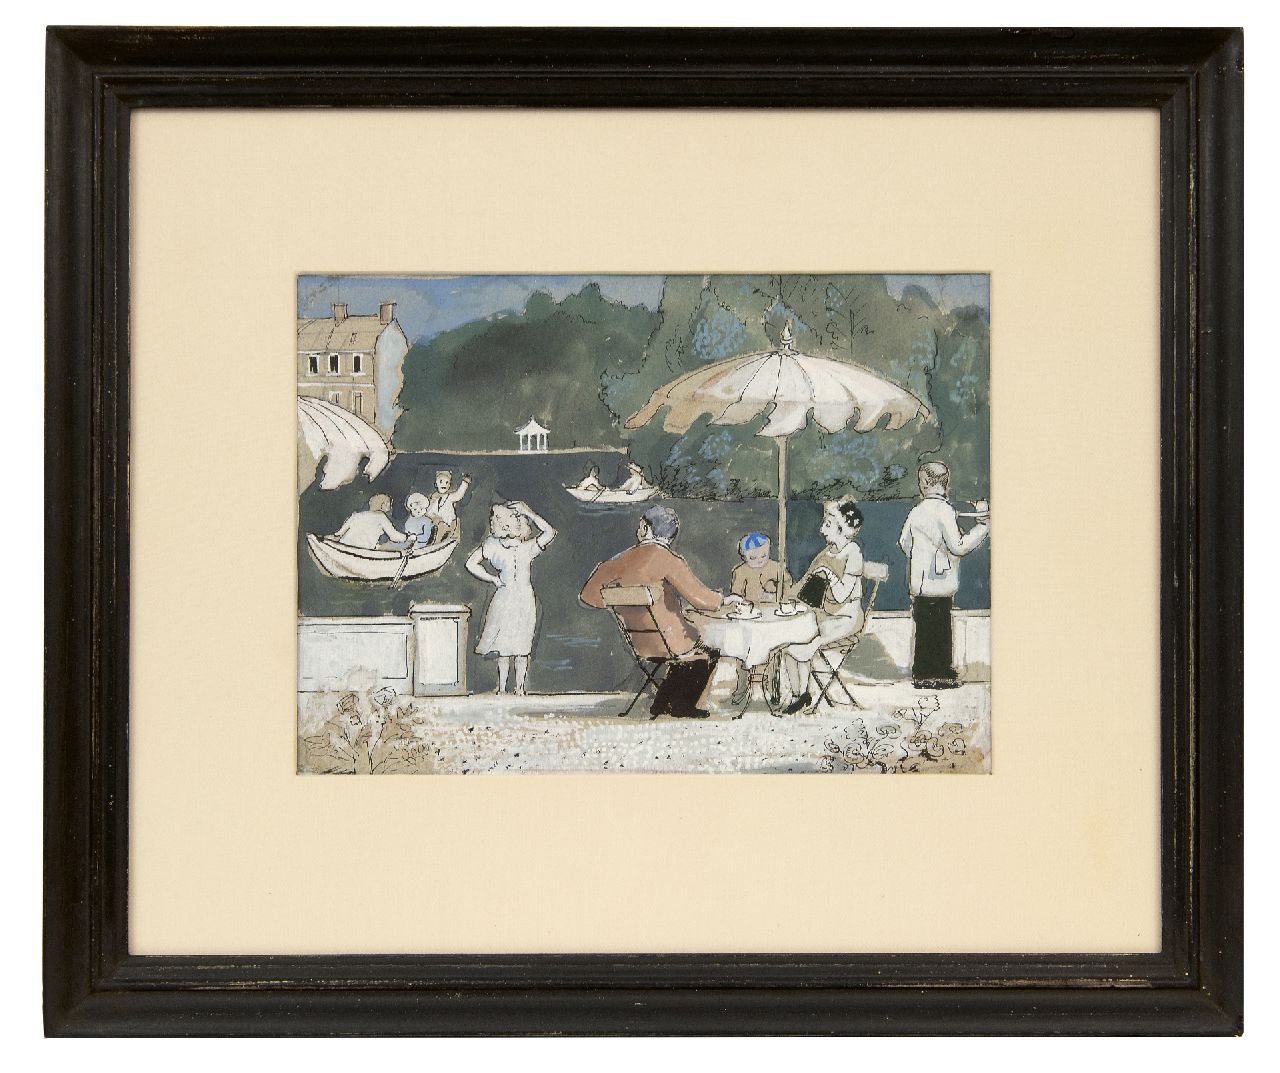 Kamerlingh Onnes H.H.  | 'Harm' Henrick Kamerlingh Onnes | Watercolours and drawings offered for sale | Terras aan de Oude Rijn between Valkenburg and Oegstgeest, pen, ink and watercolour on paper 19.5 x 27.0 cm, painted circa 1960